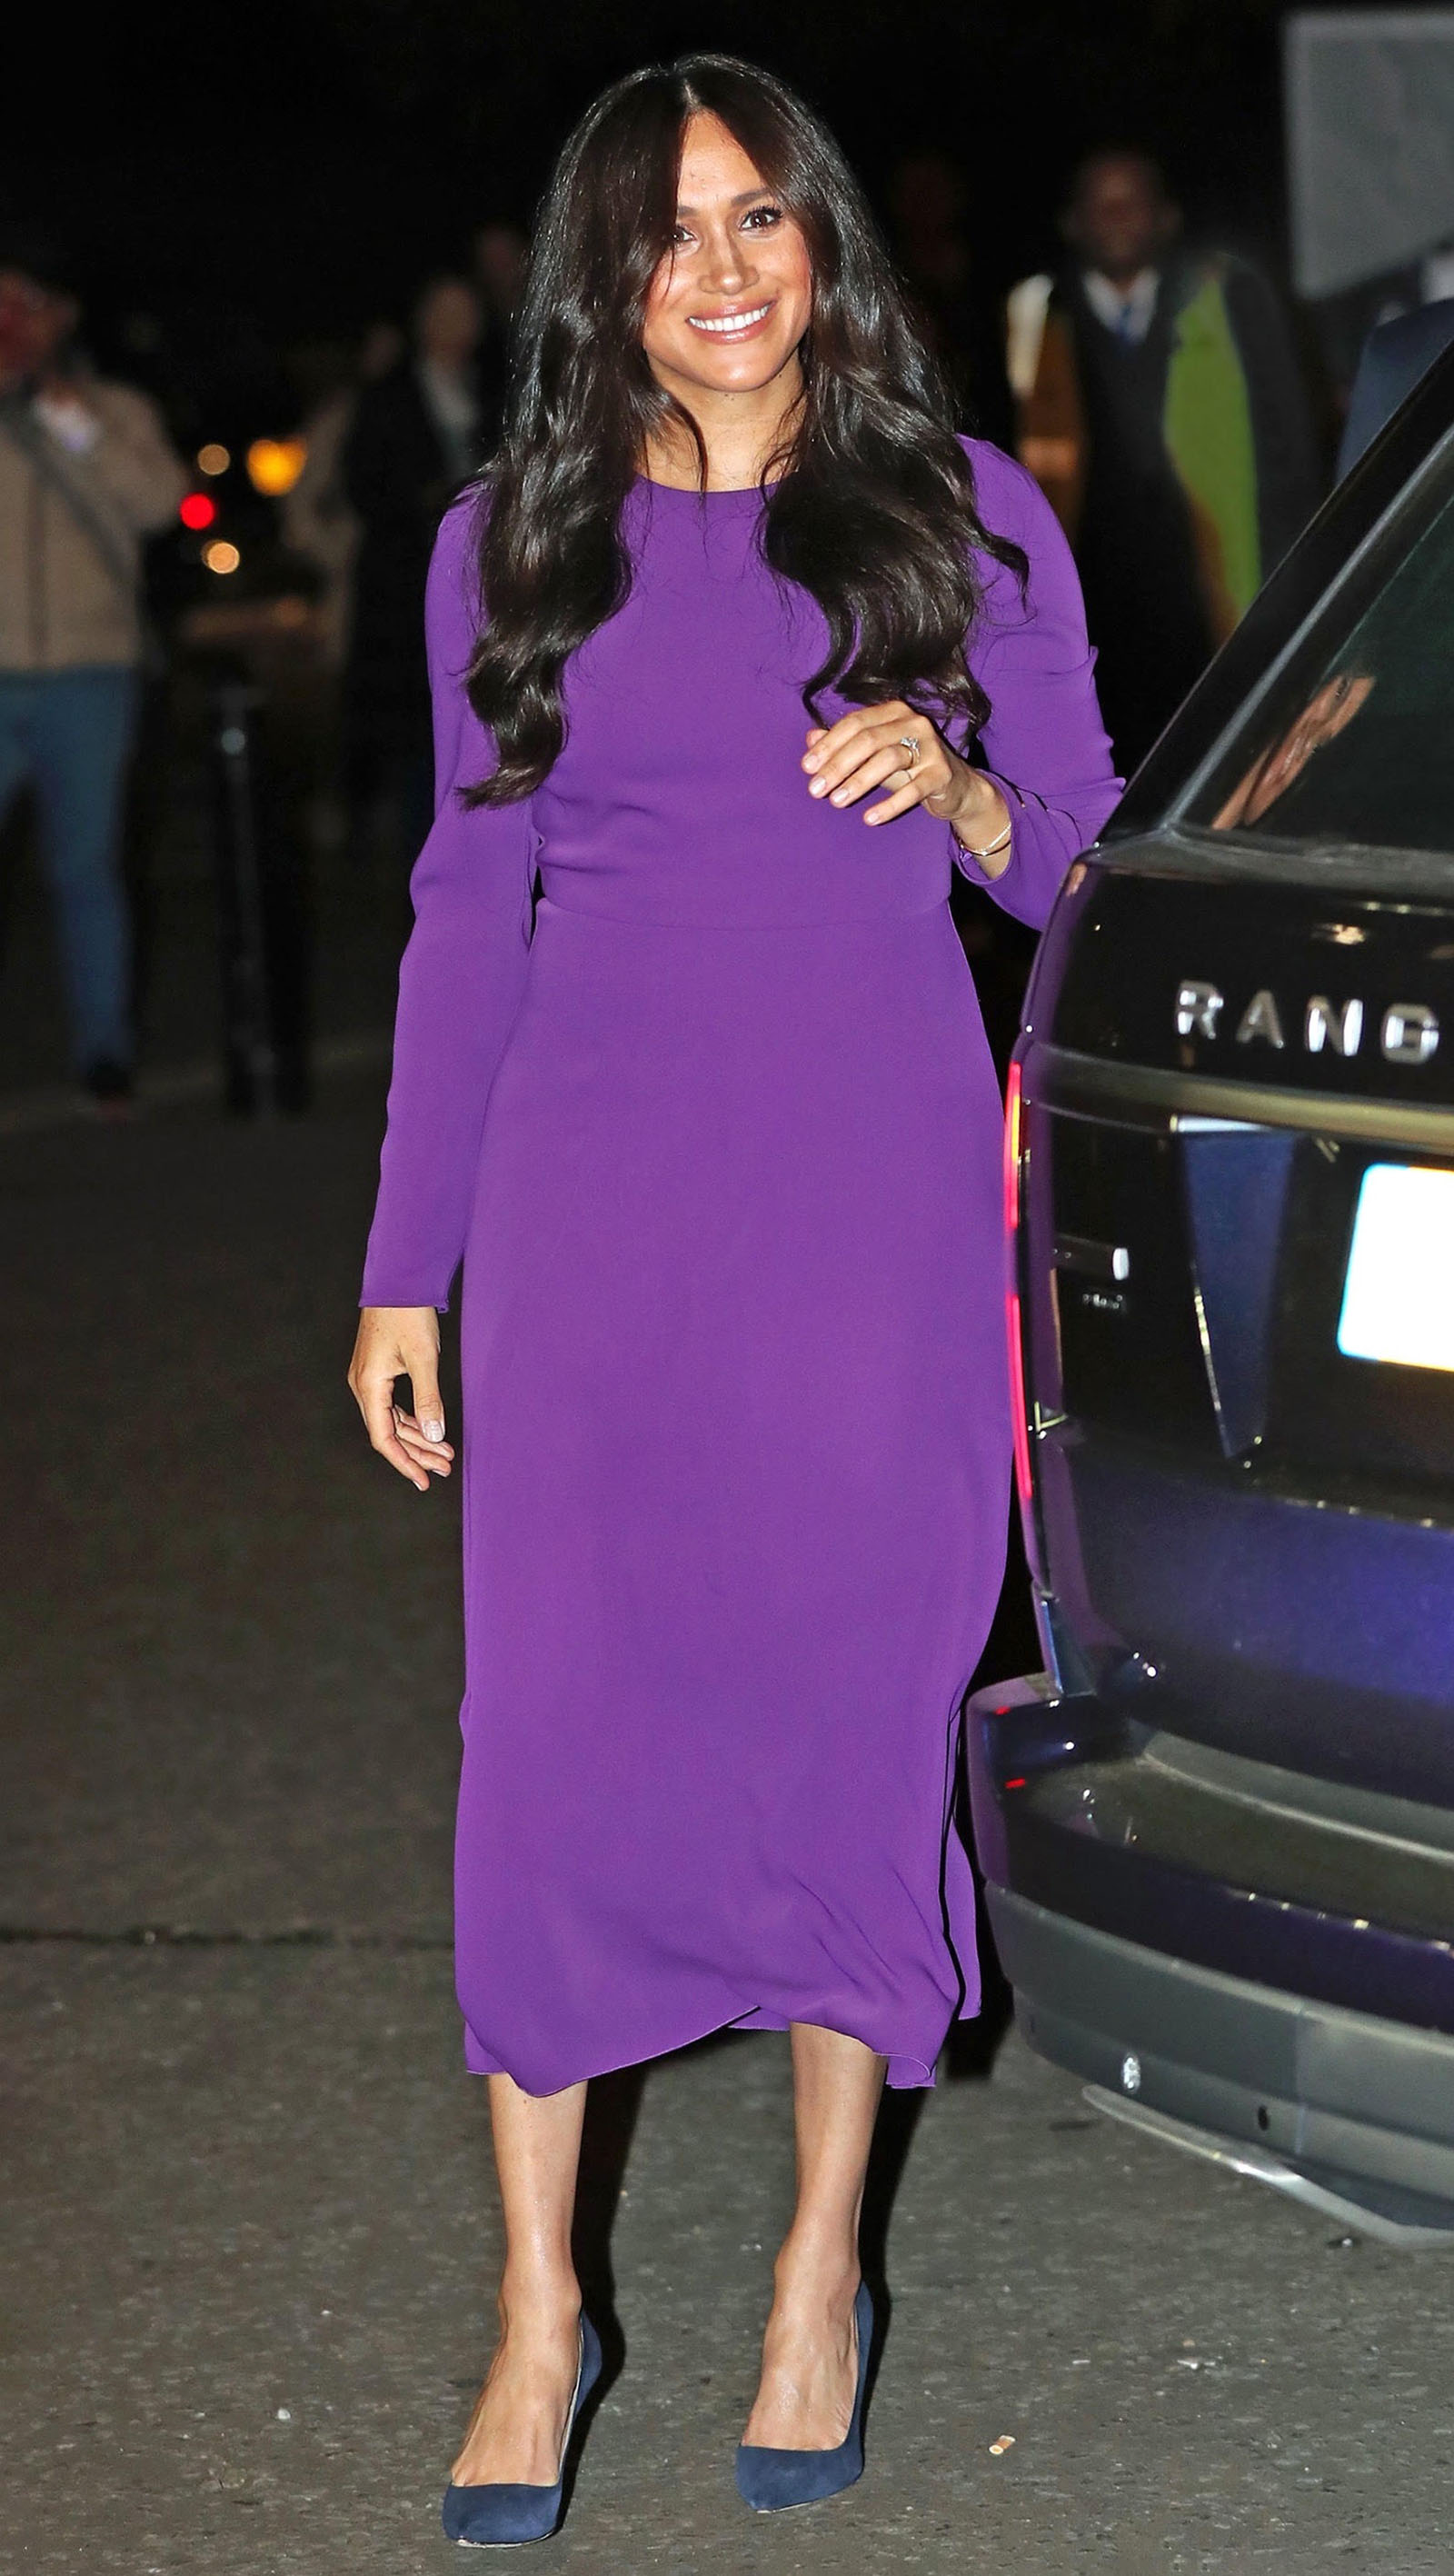 Turn heads in this amazing purple dress look for less!